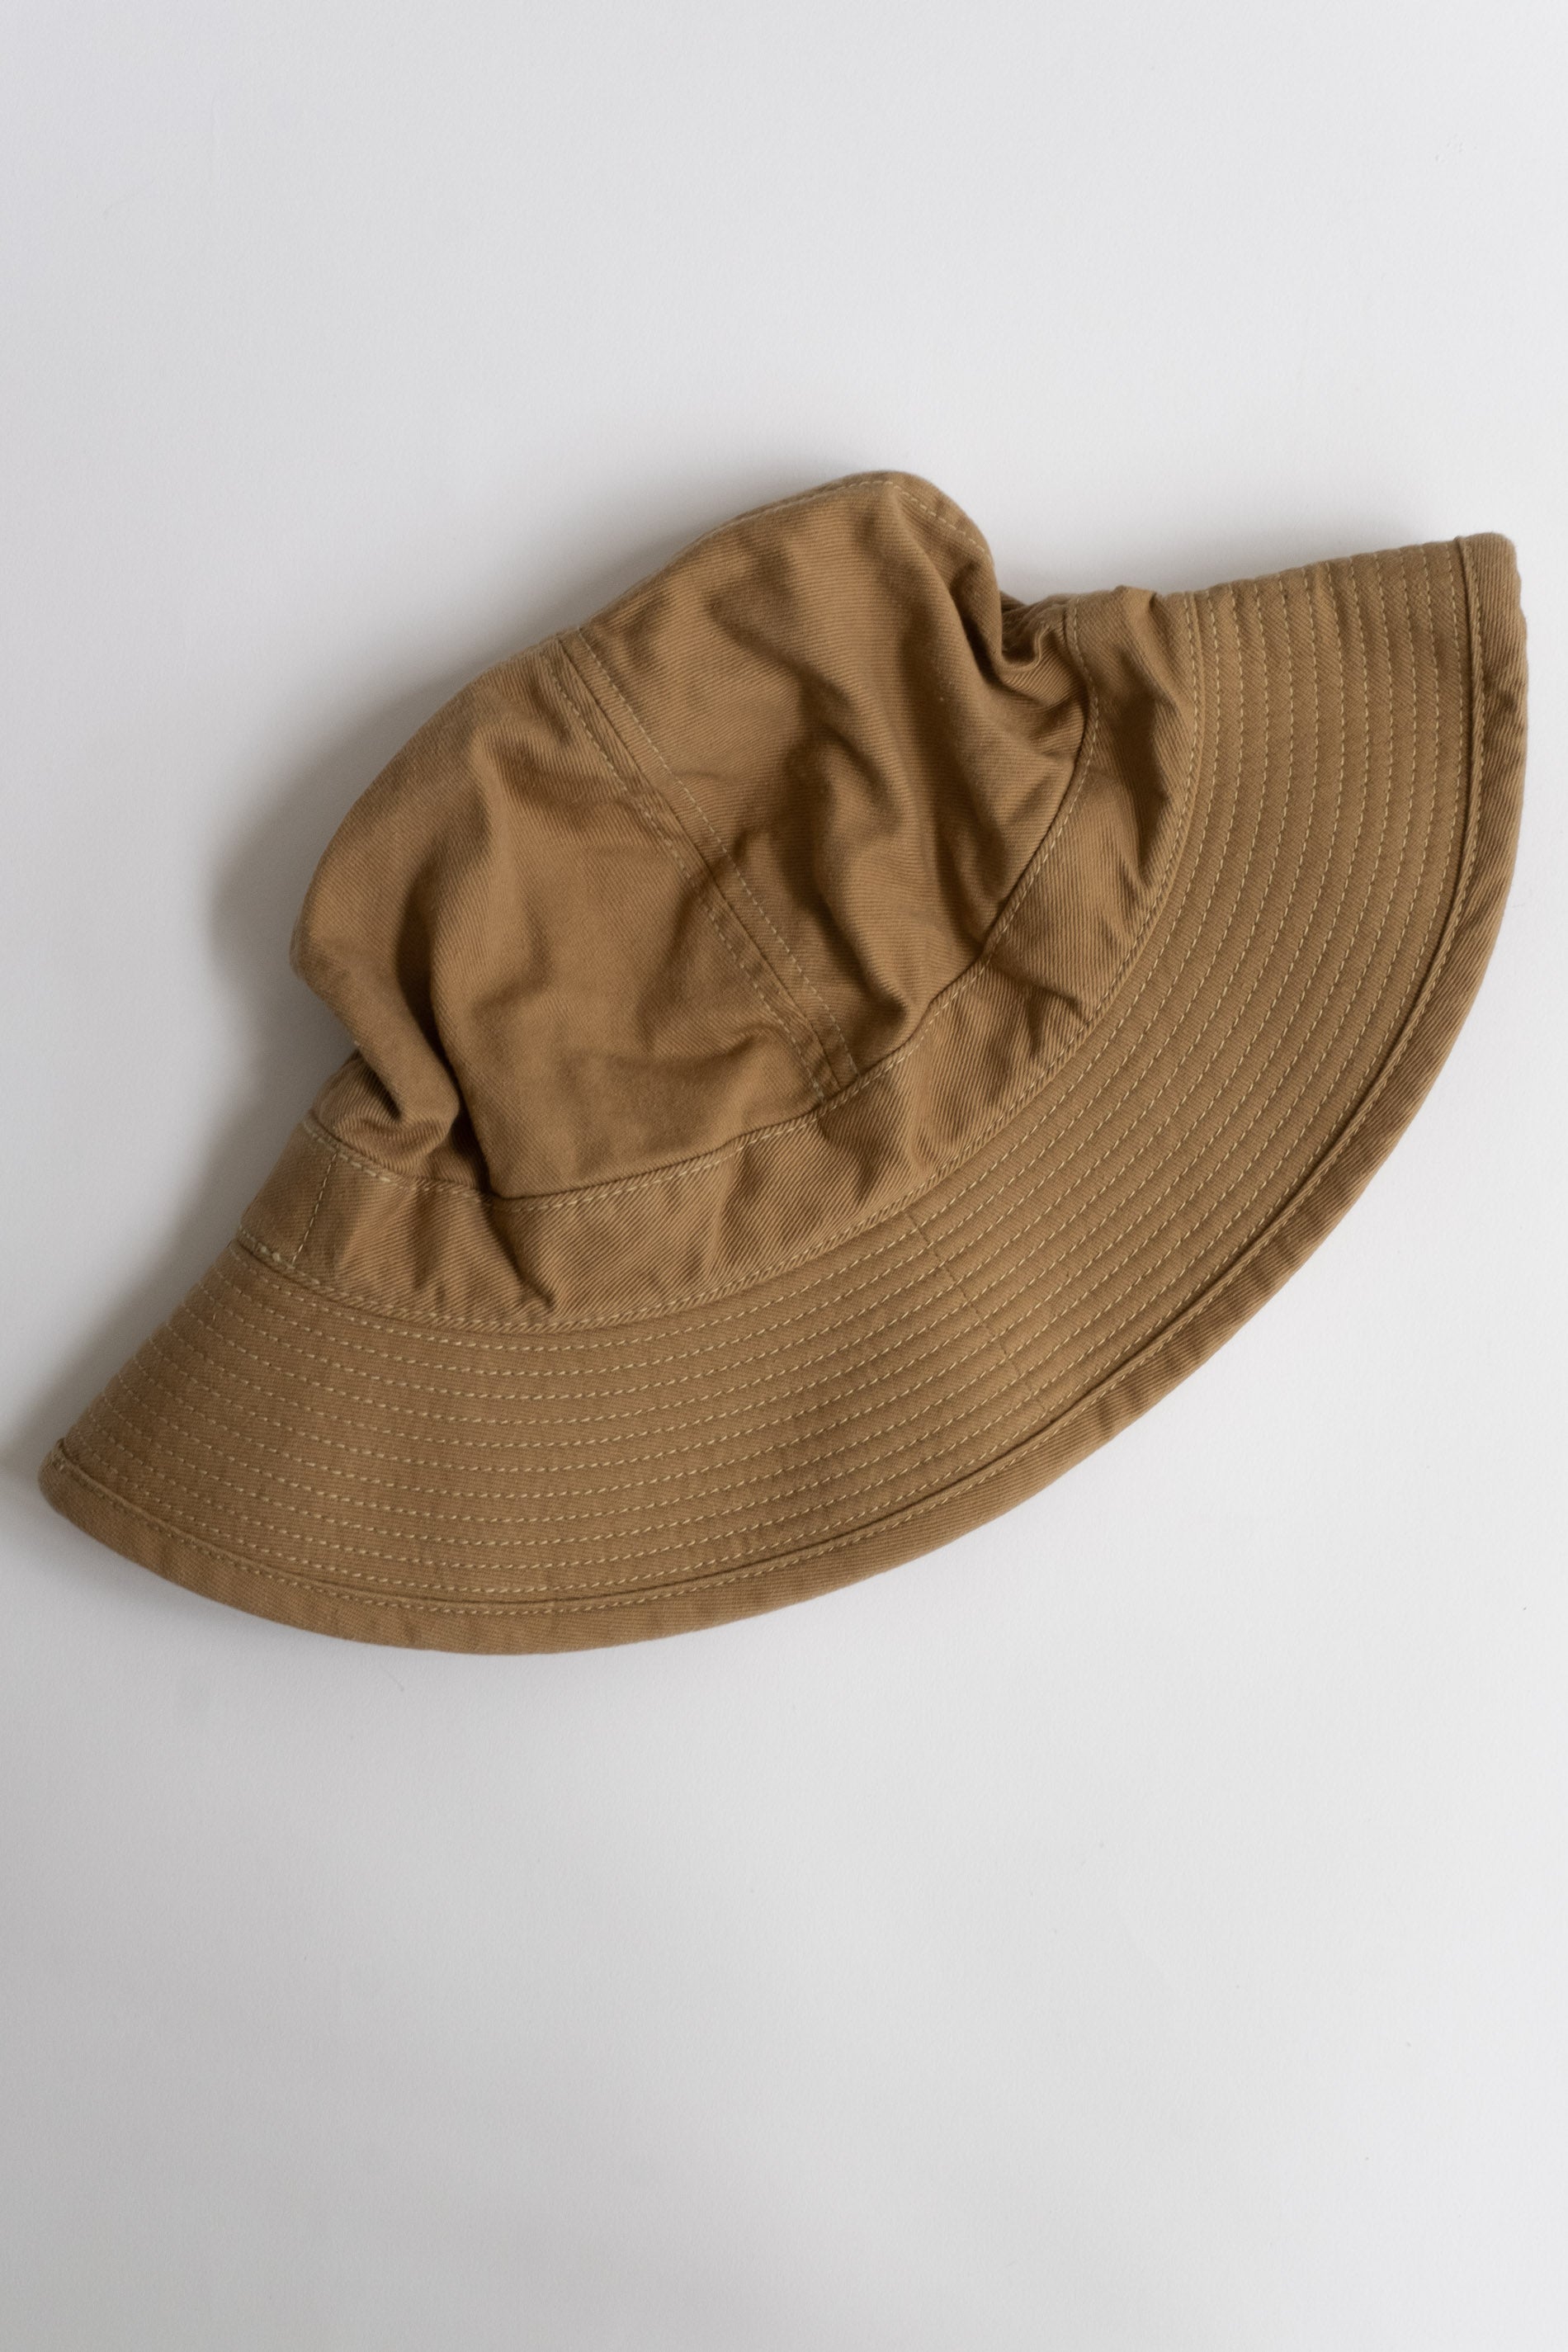 IN NAVY CHINO RELIQUARY KHAKI HAT | US orSlow –